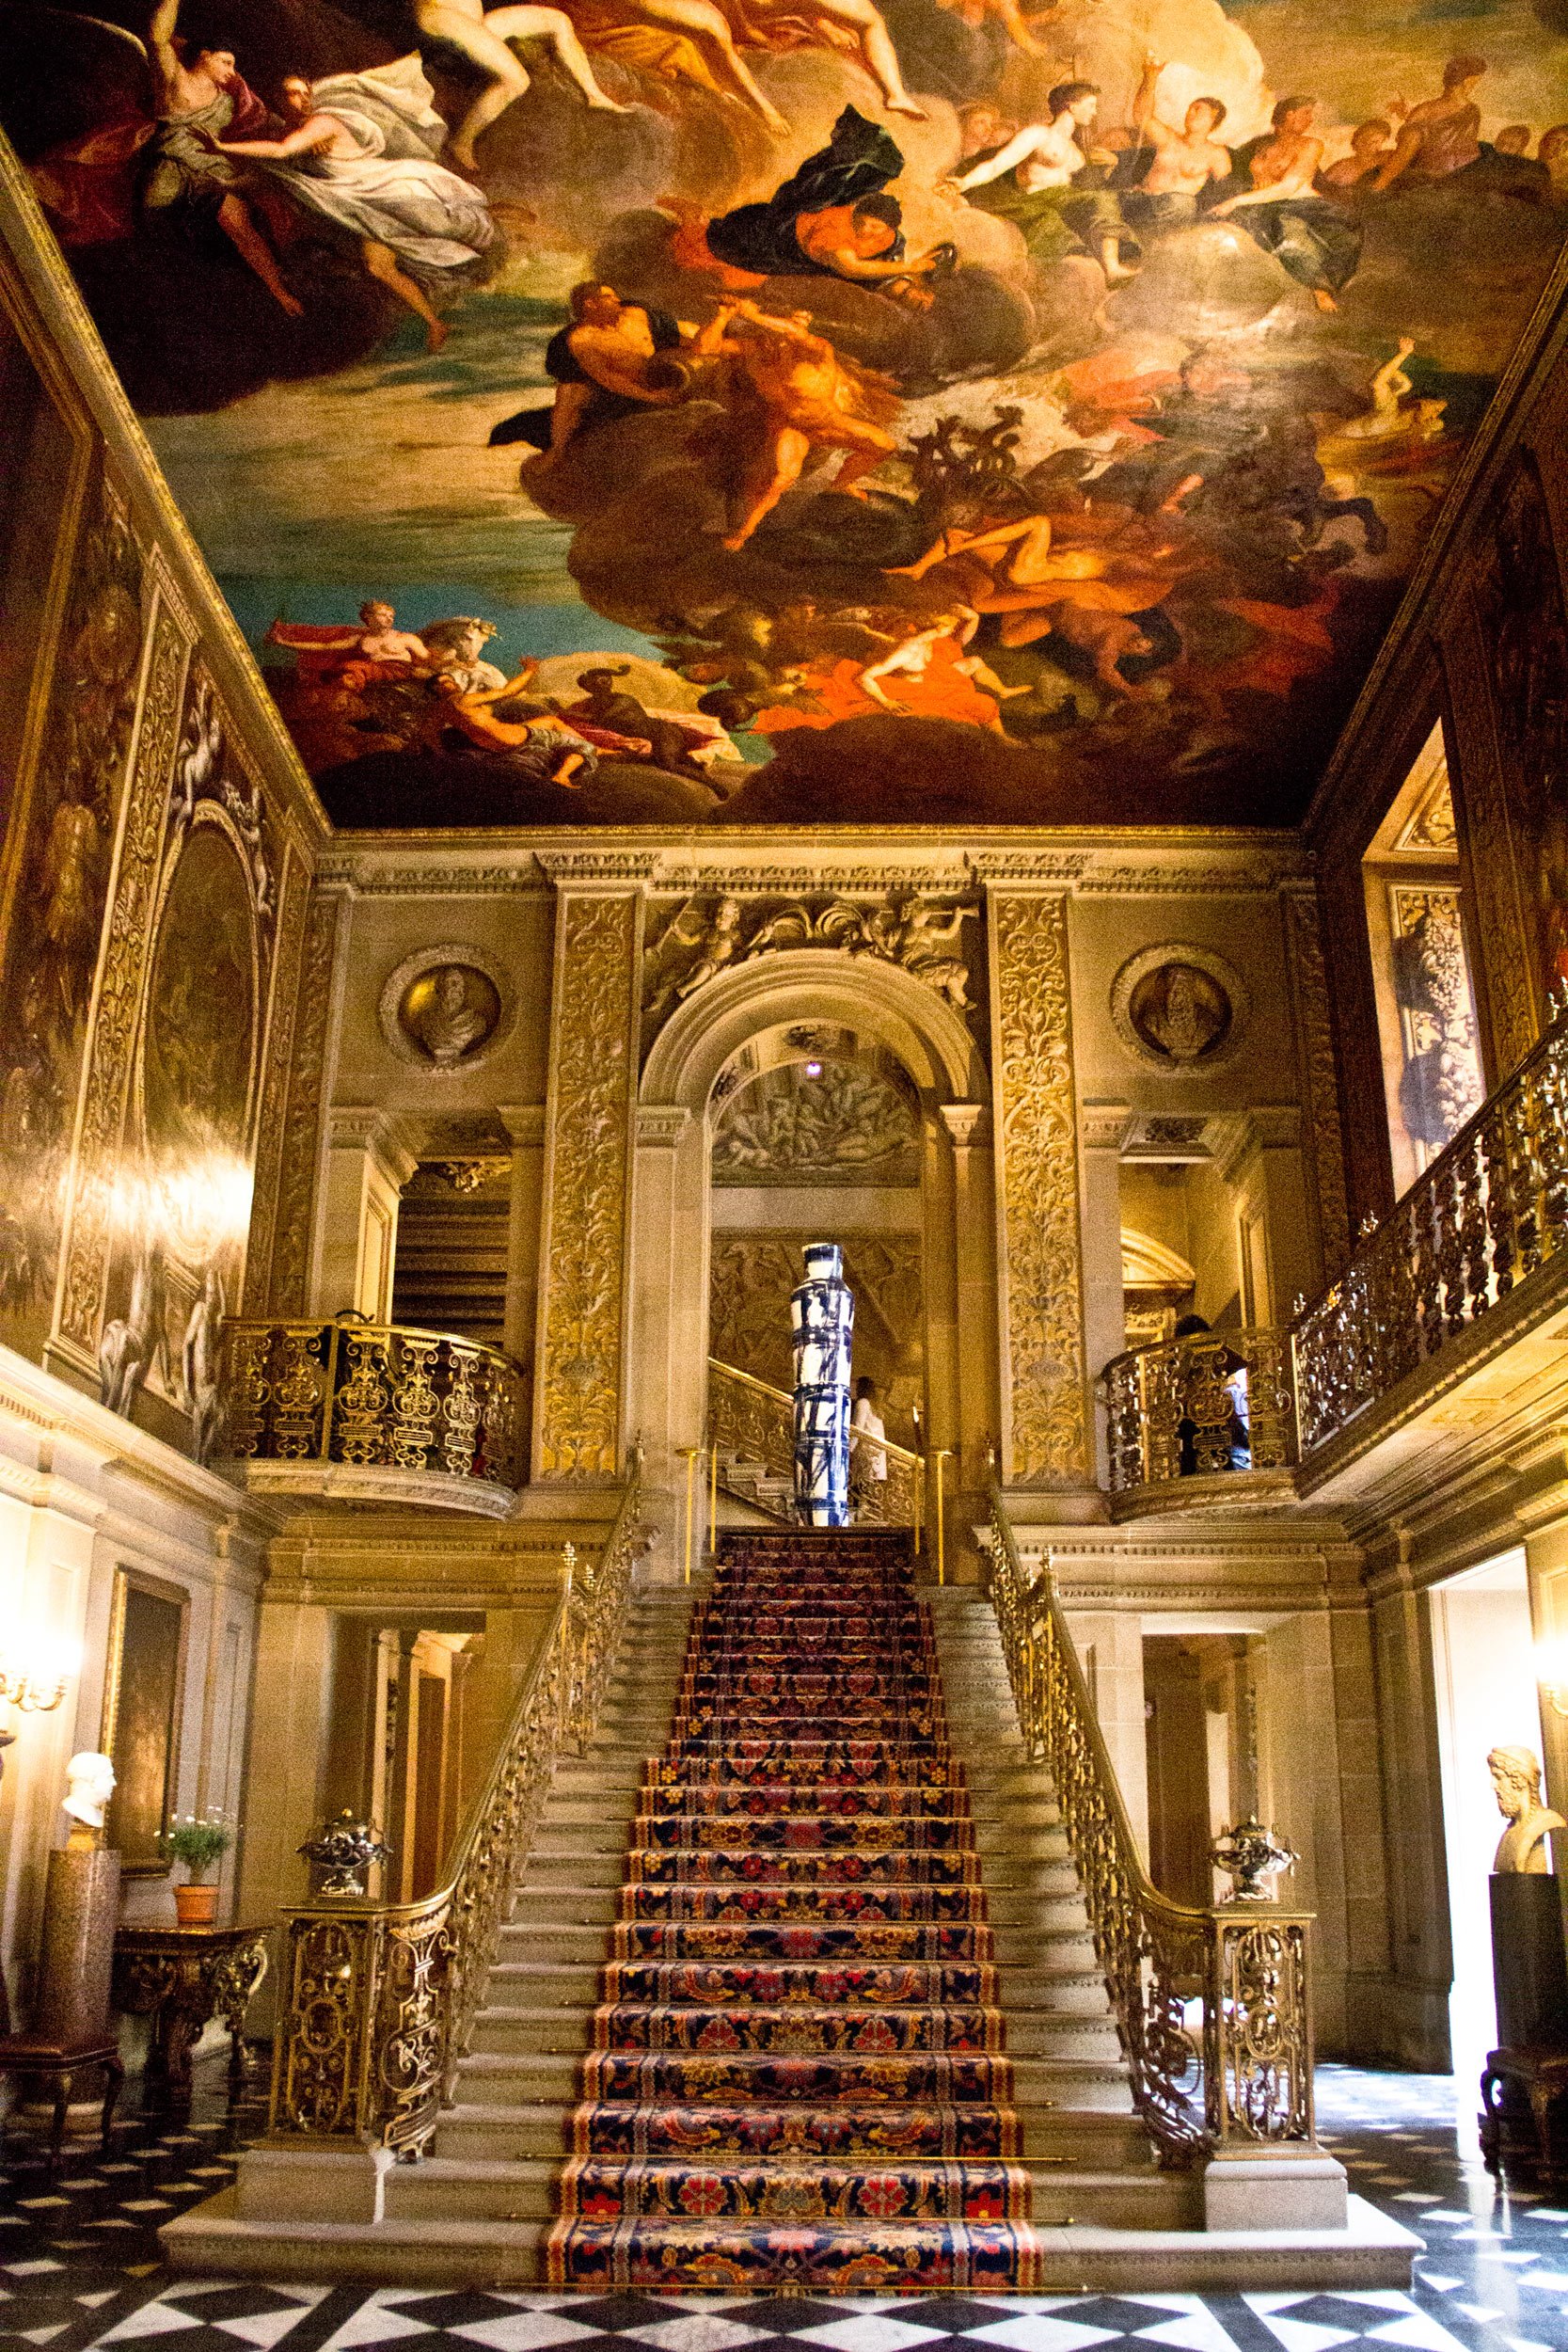 main-entry-hall-in-chatsworth-house-with-painted-ceiling